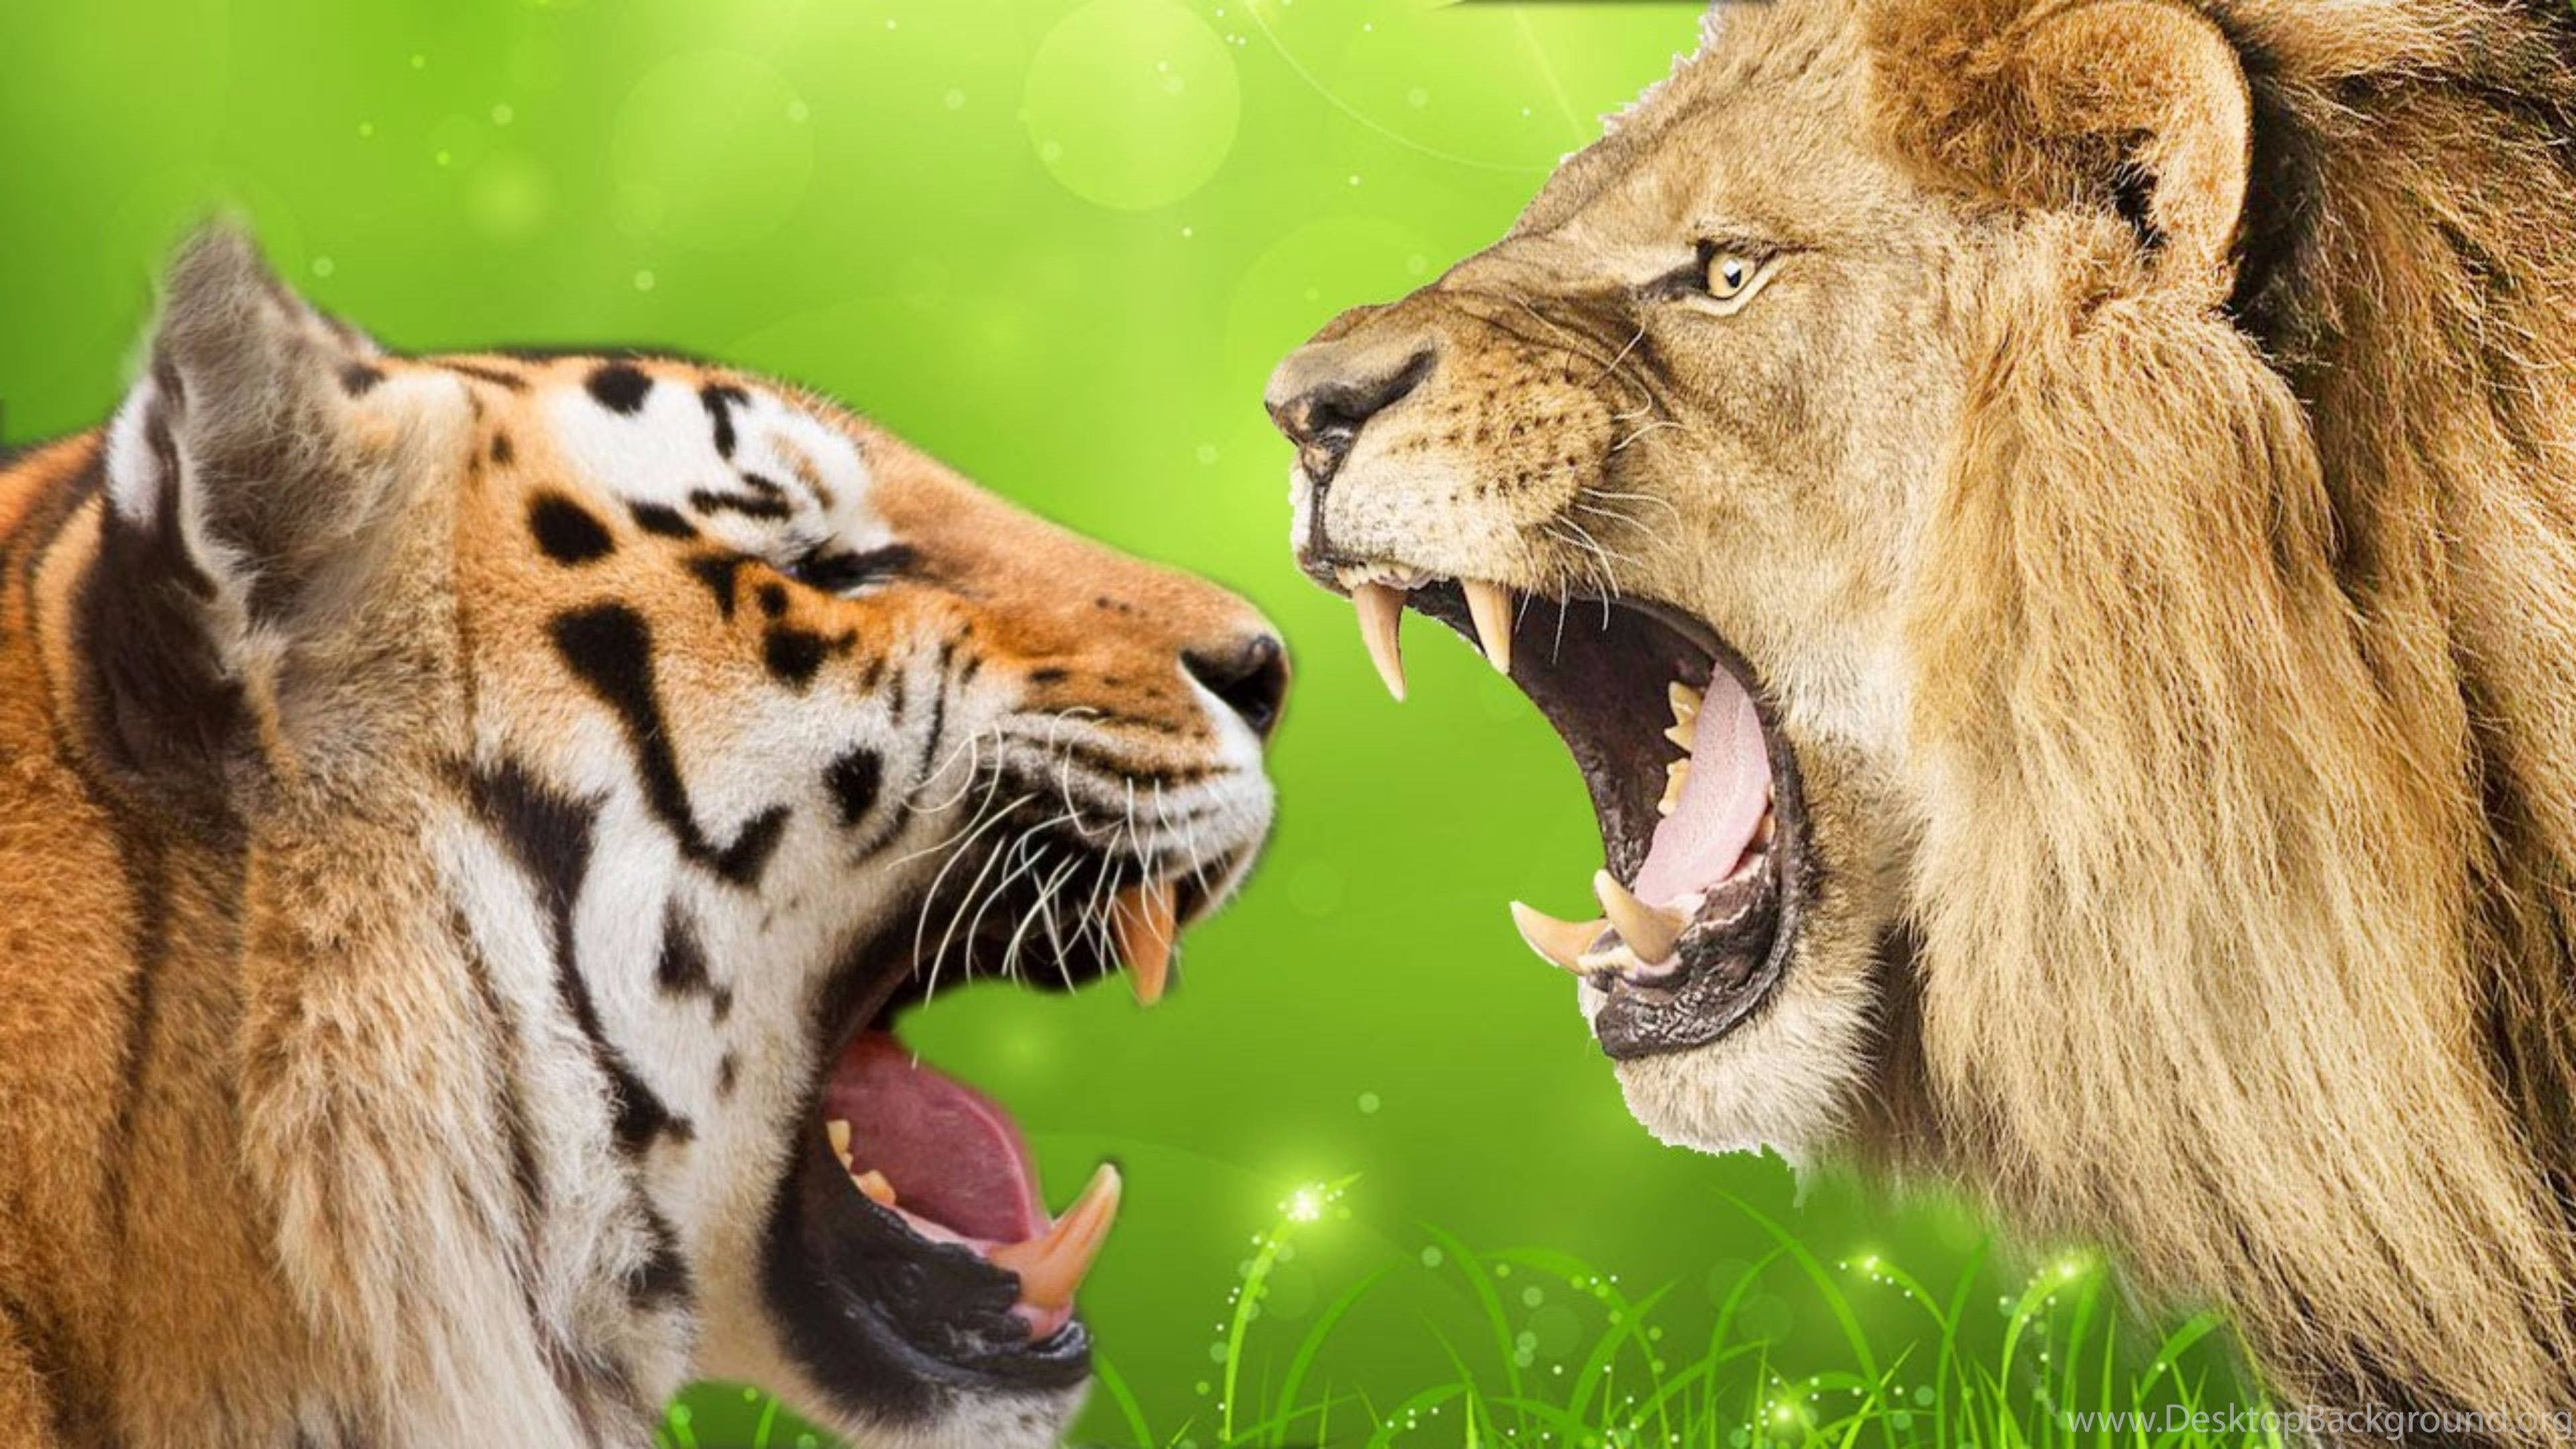 Roaring Lion And Tiger Wallpaper